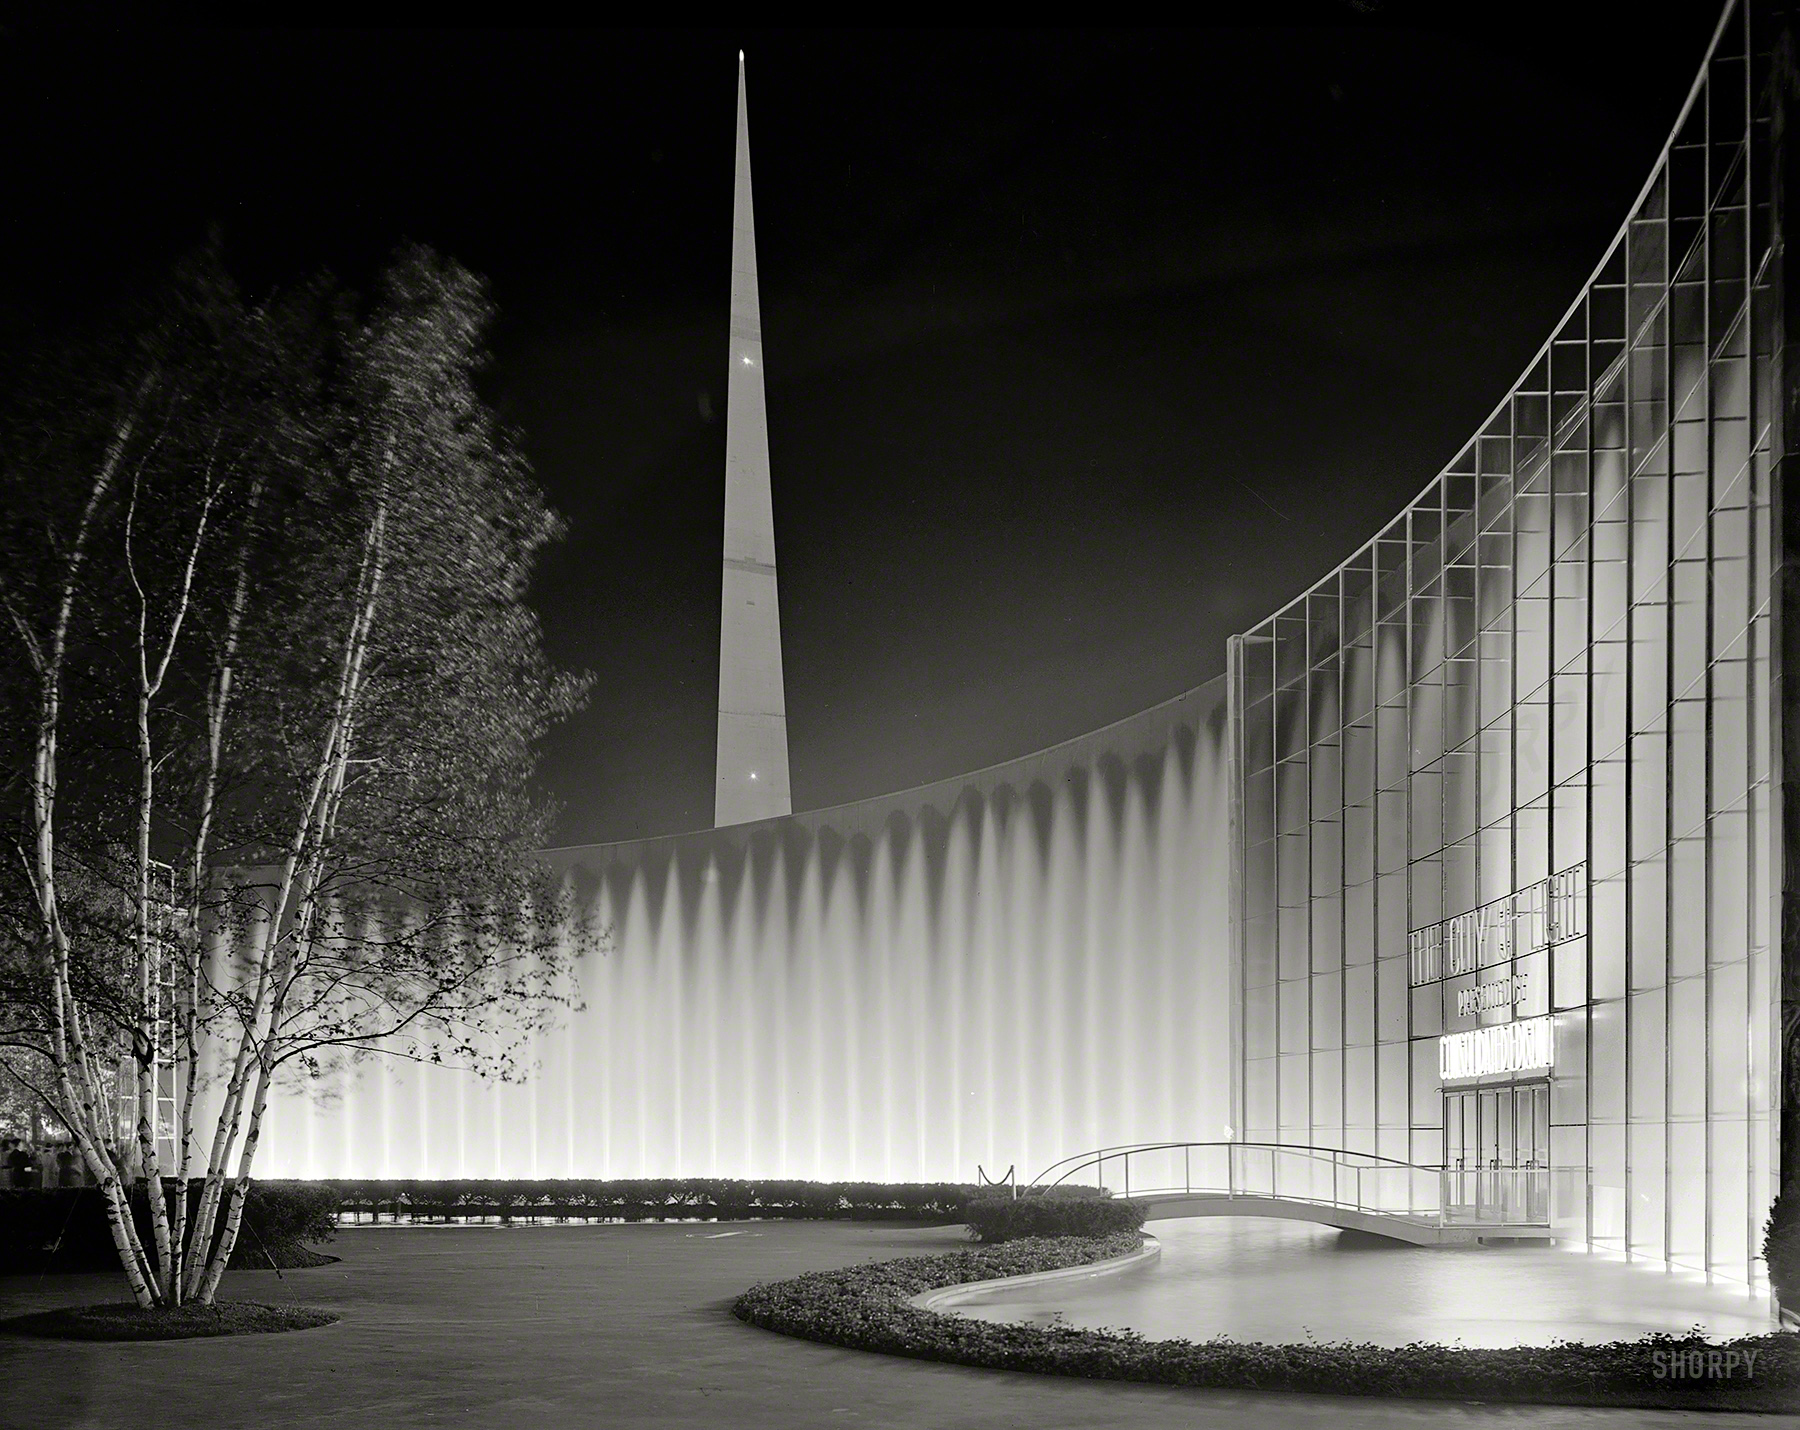 June 24, 1939. "World's Fair night views. Consolidated Edison fountains." The City of Light with the Trylon rising behind. Gottscho-Schleisner photo. View full size.